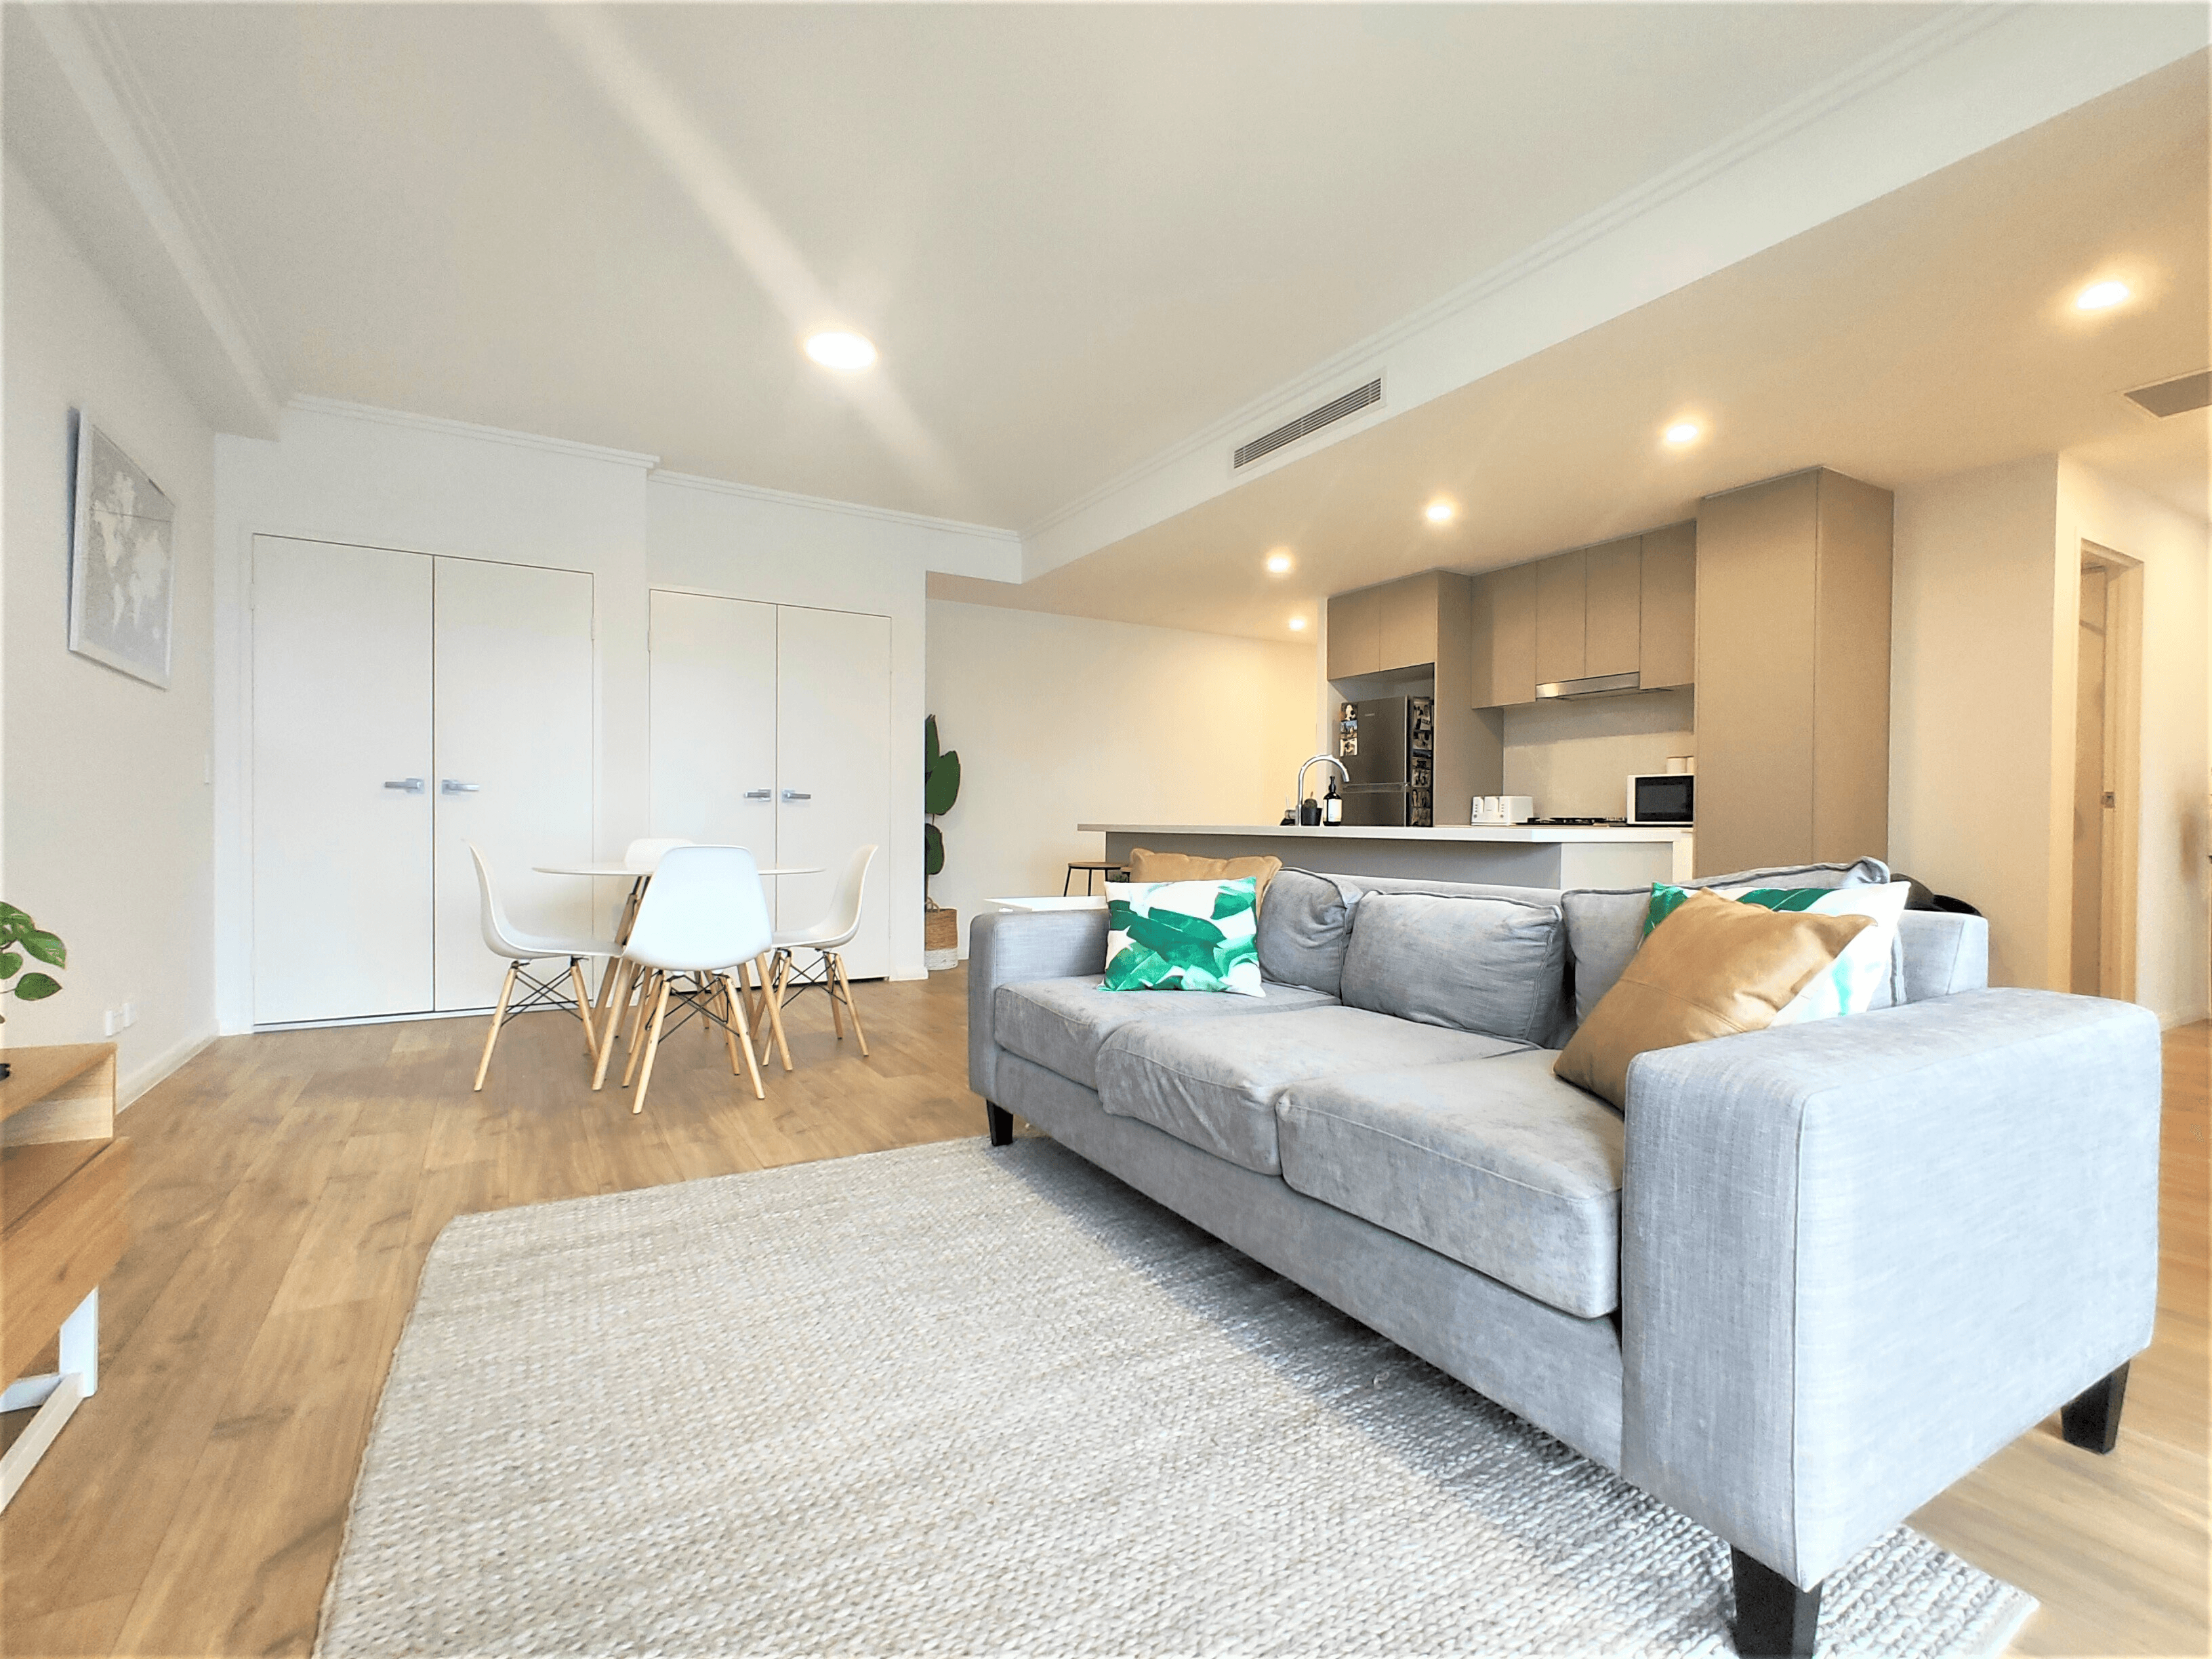 B303/9 Terry Rd, ROUSE HILL, NSW 2155